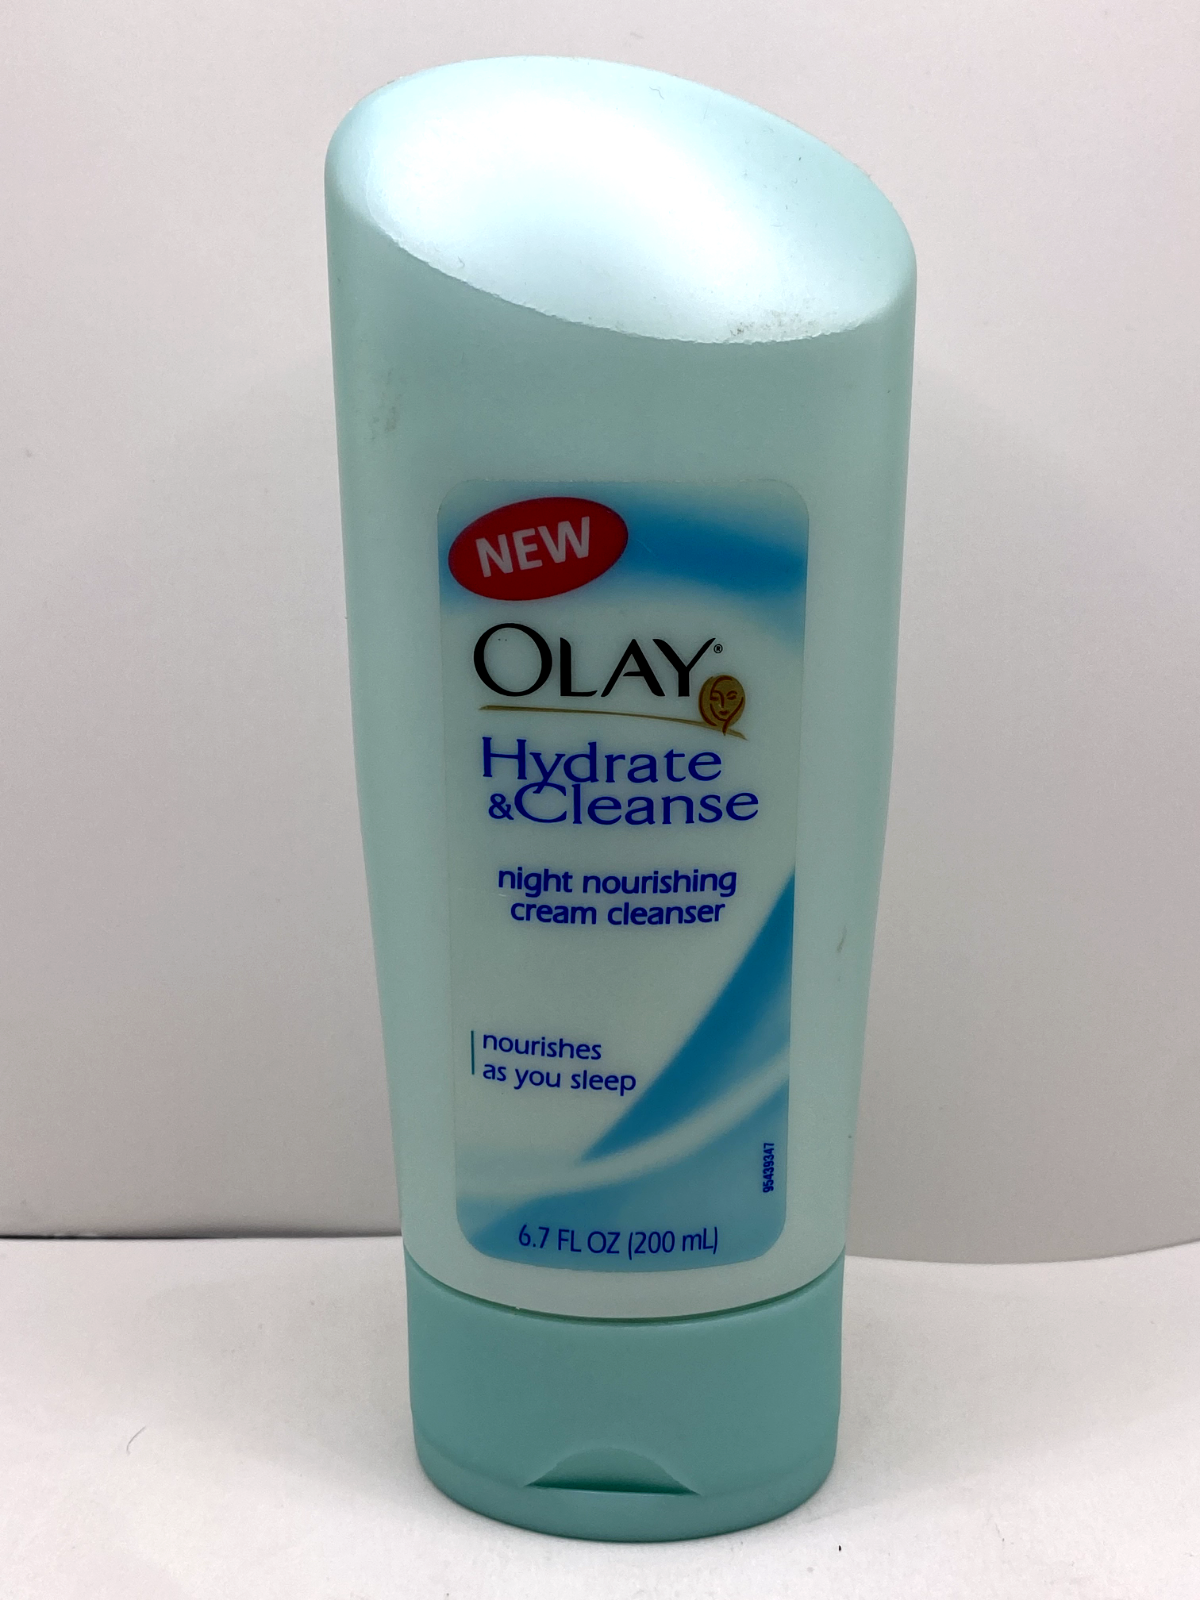 Olay Hydrate & Cleanse Night Nourishing Cream Cleanser - 6.7 oz - $24.99